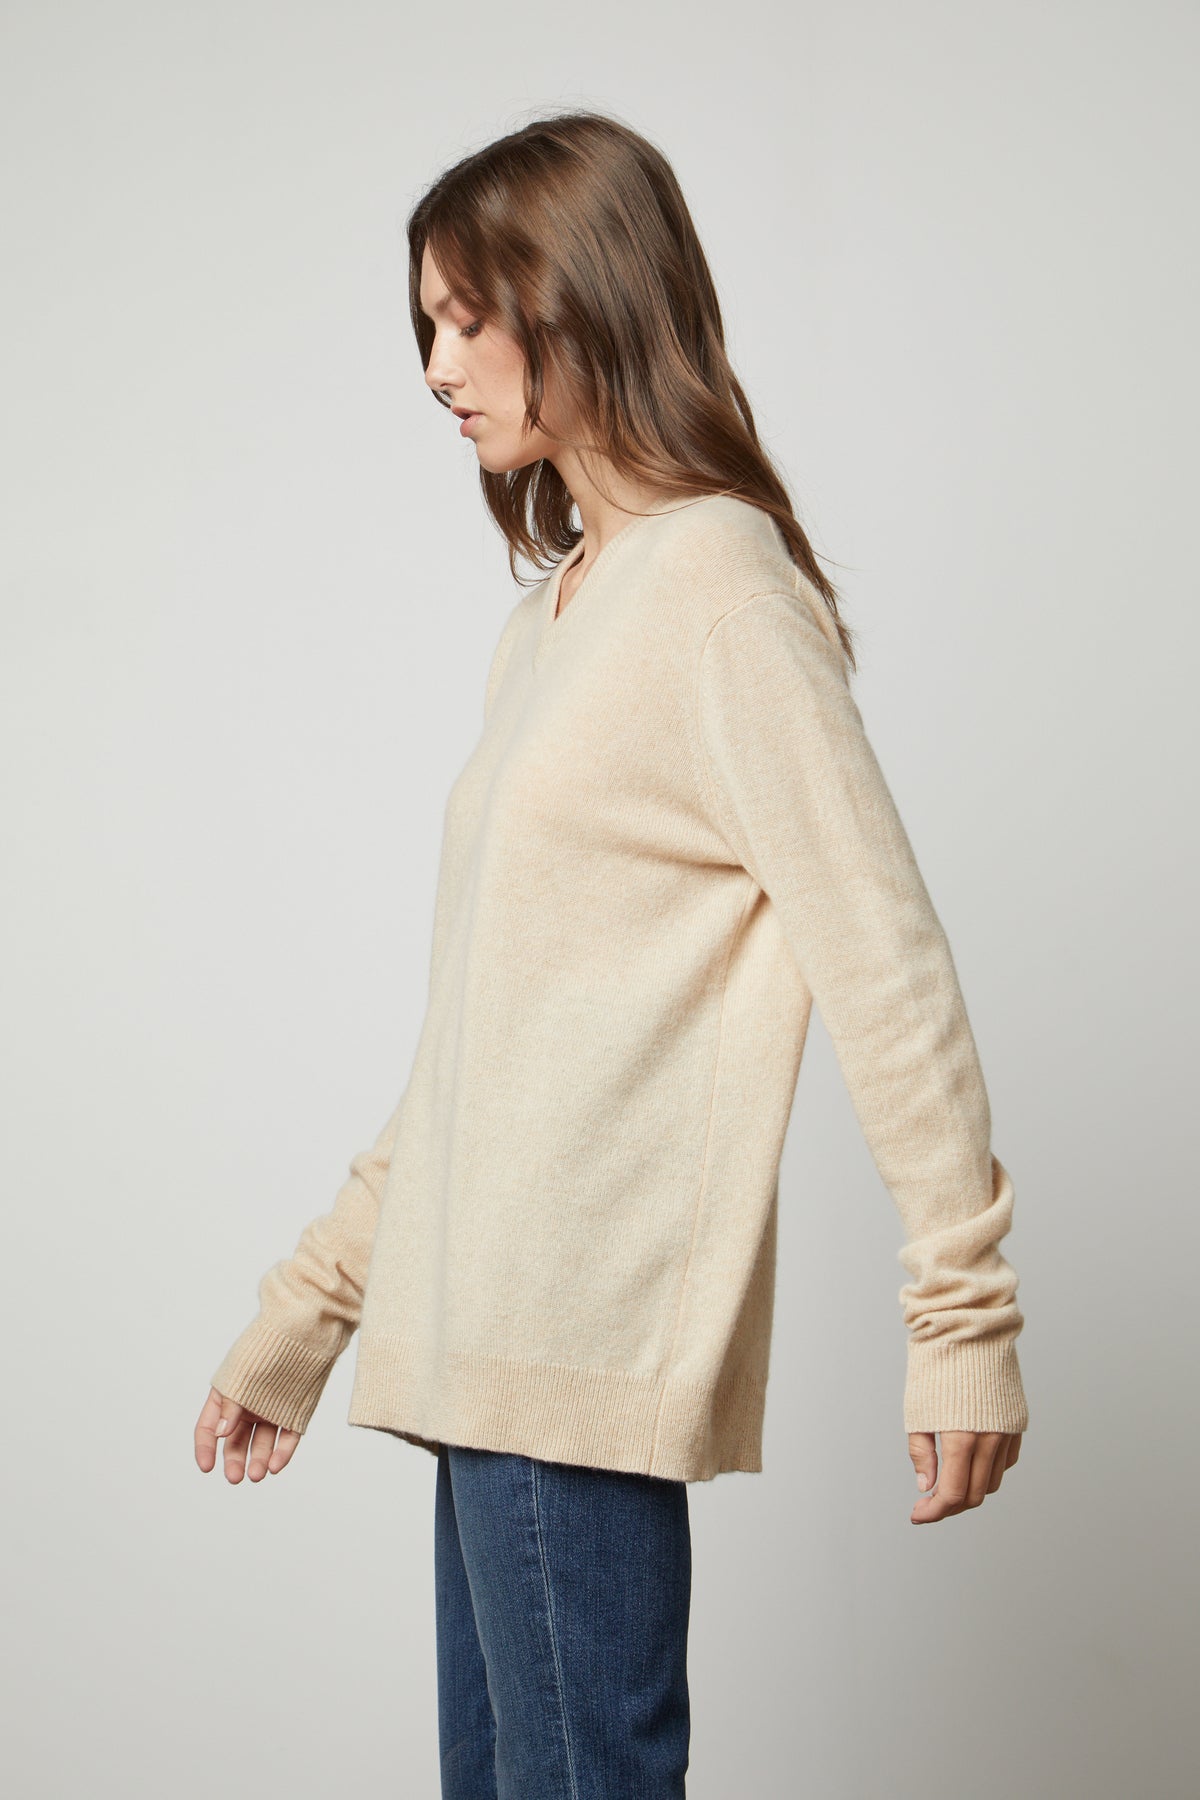 The model is wearing an oversized Velvet by Graham & Spencer Harmony Cashmere V-Neck Sweater and jeans.-35655722762433